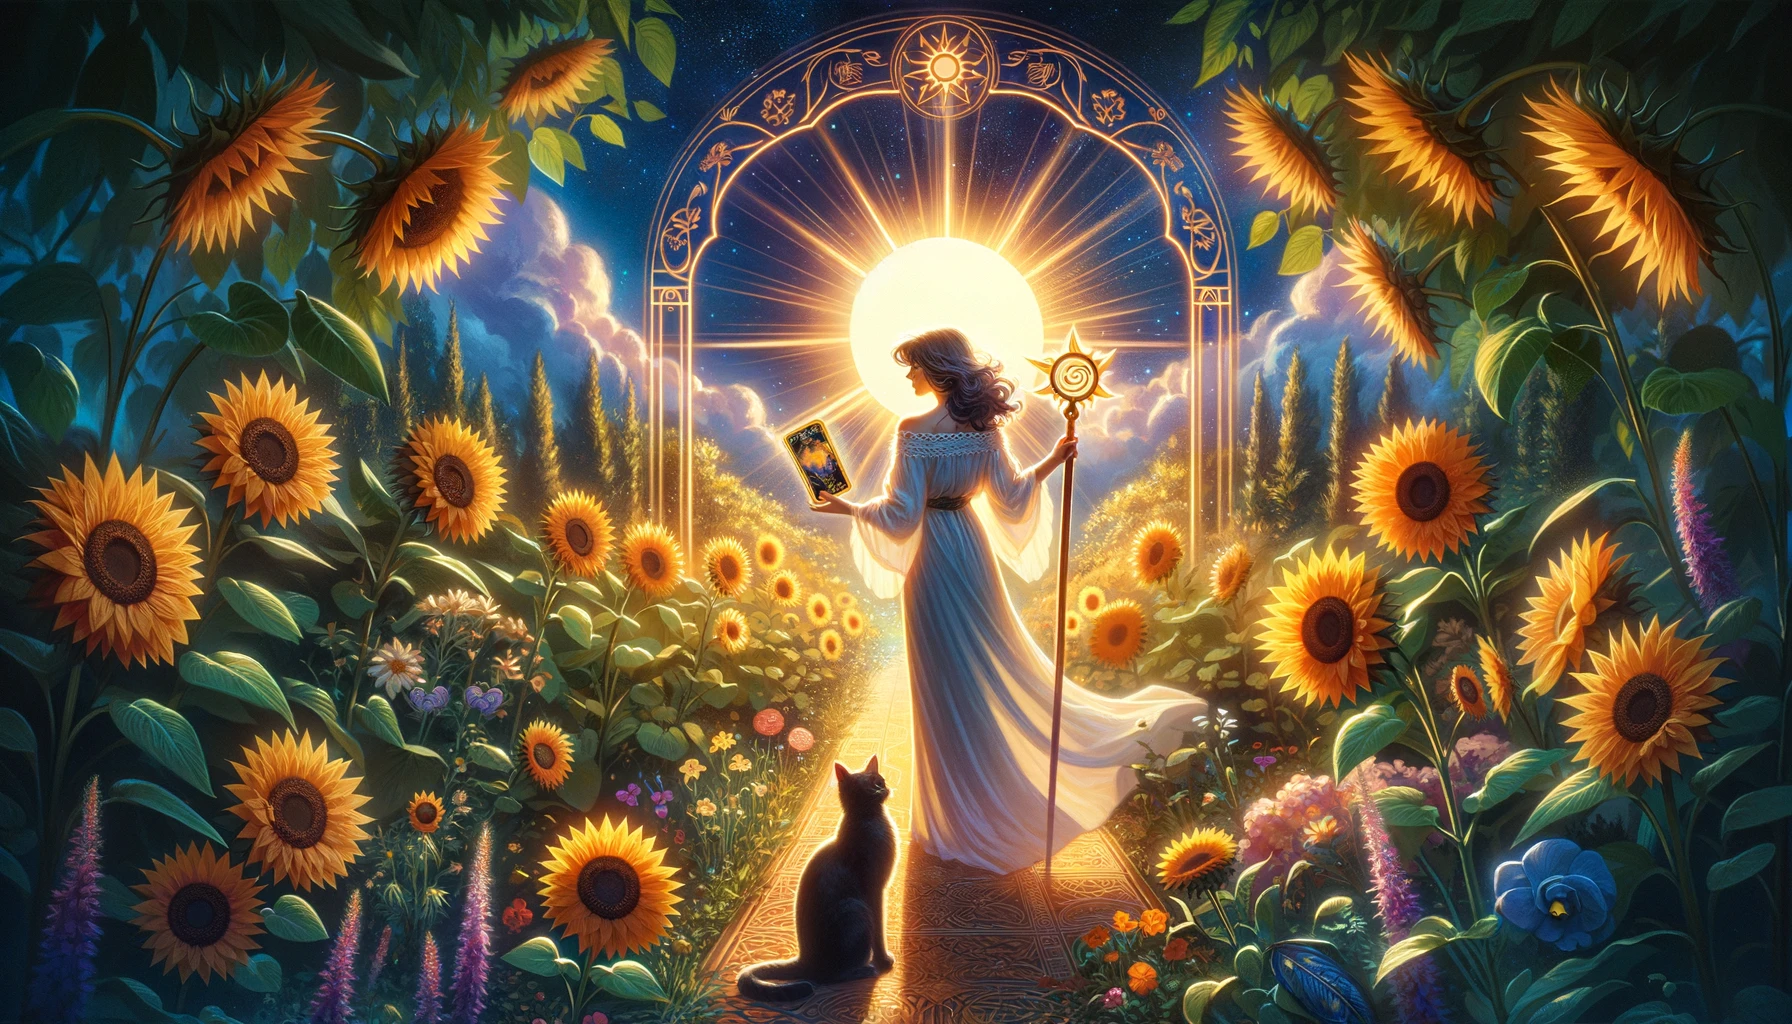 An illustration of the Queen of Wands exuding warmth and positivity in a romantic setting. She stands amidst a vibrant garden, radiating light and energy, symbolizing her nurturing and encouraging nature as a partner. The lush surroundings convey growth and fertility, embodying the qualities of passion, attraction, and supportive love.